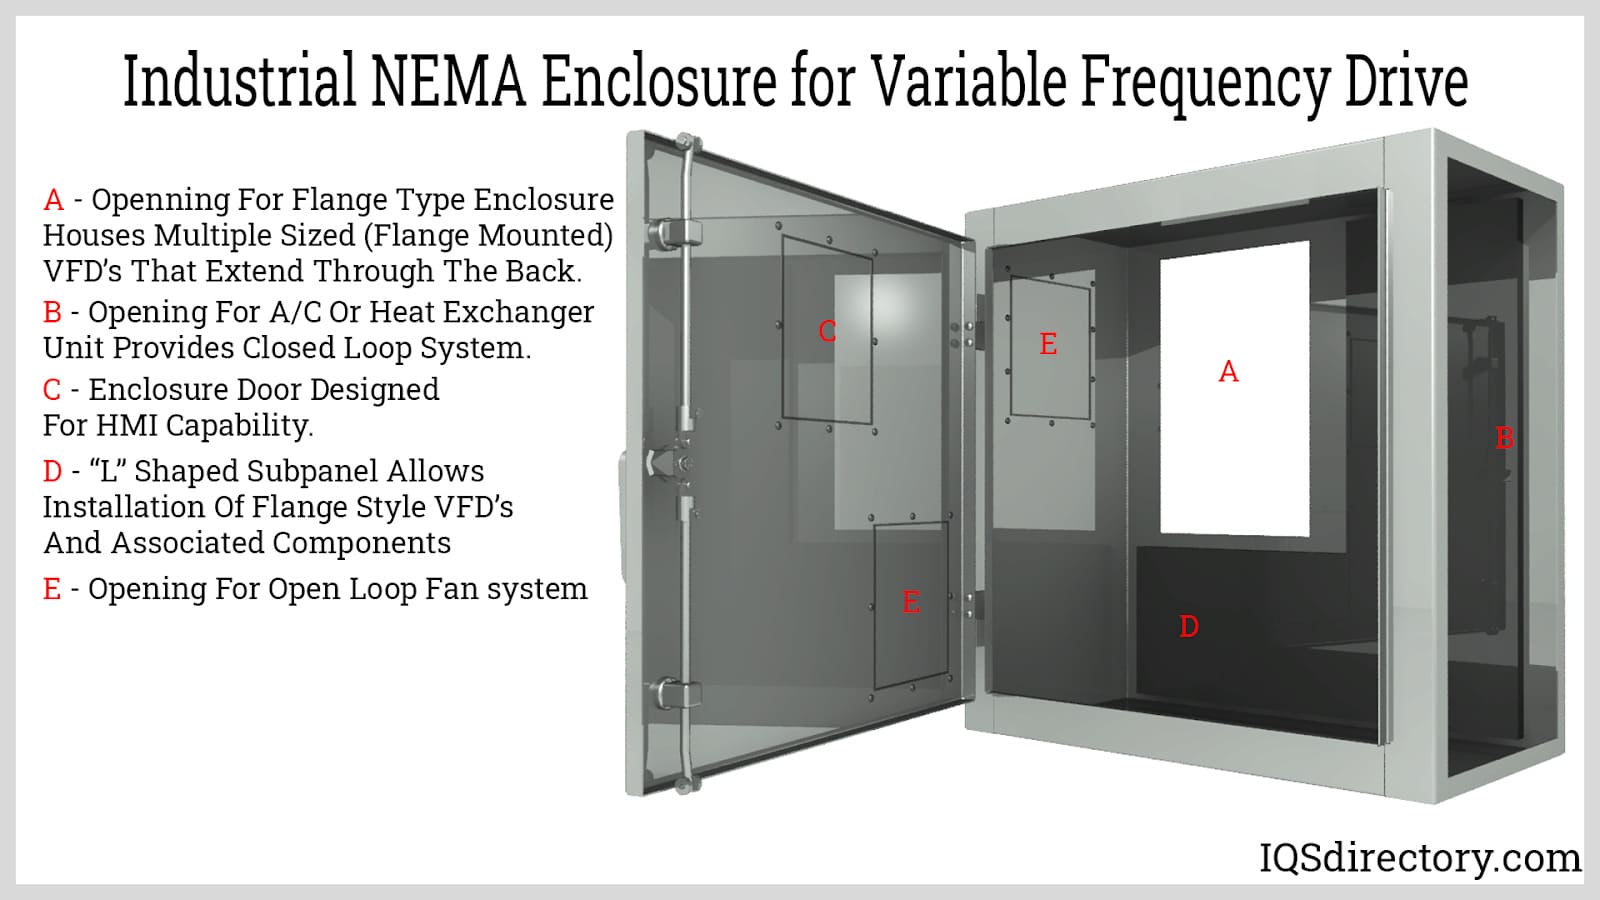 Industrial NEMA Enclosure for Variable Frequency Drive